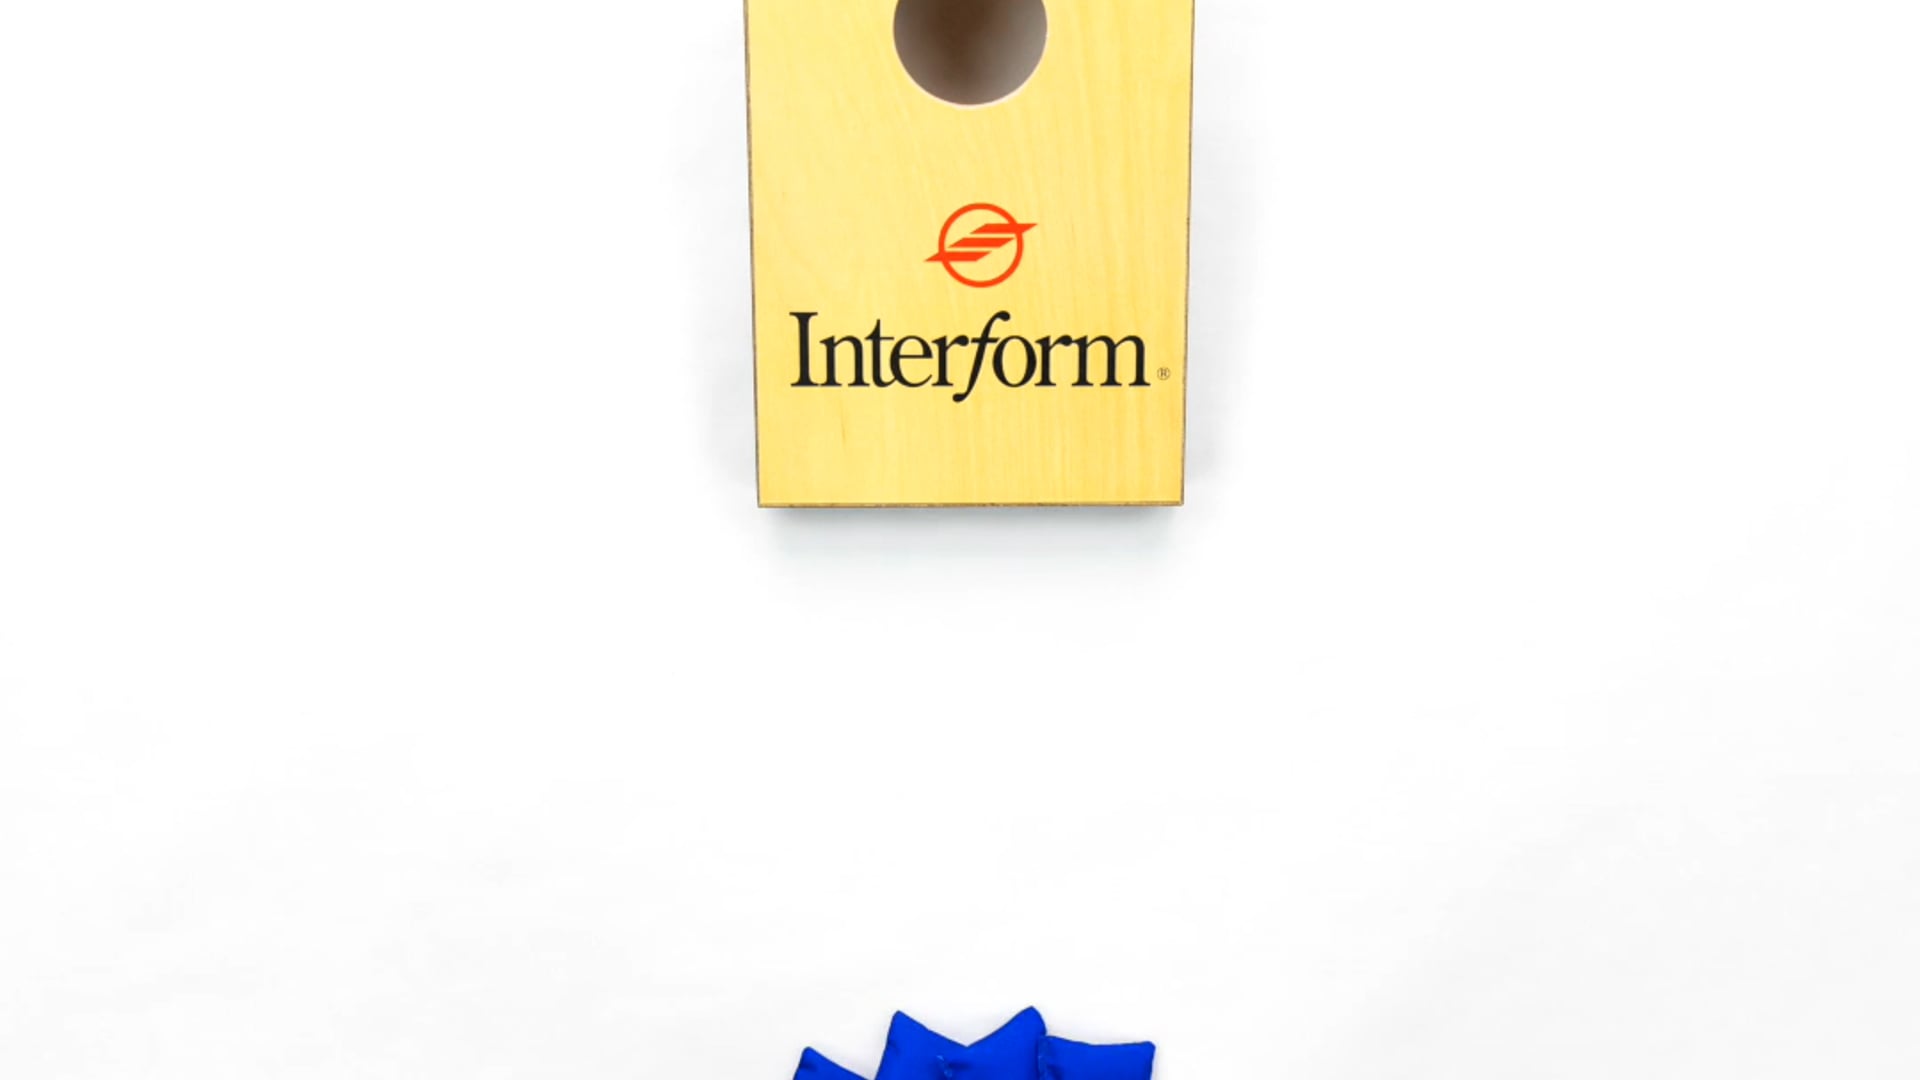 Interform Branded Swag Stop Motion Video